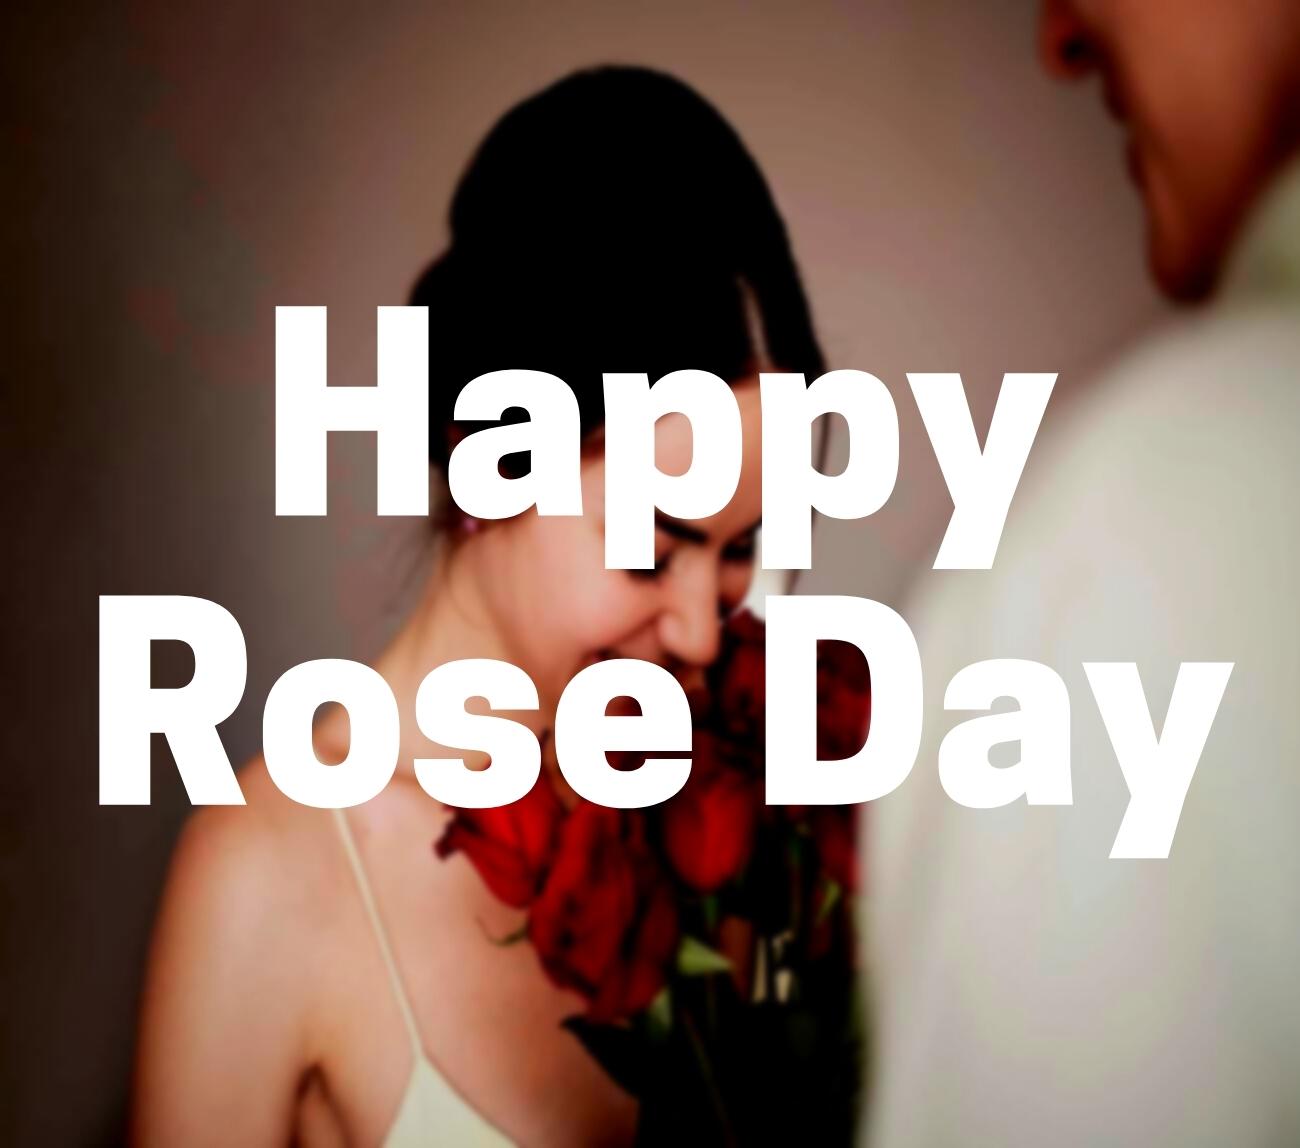 world rose day 2022 images